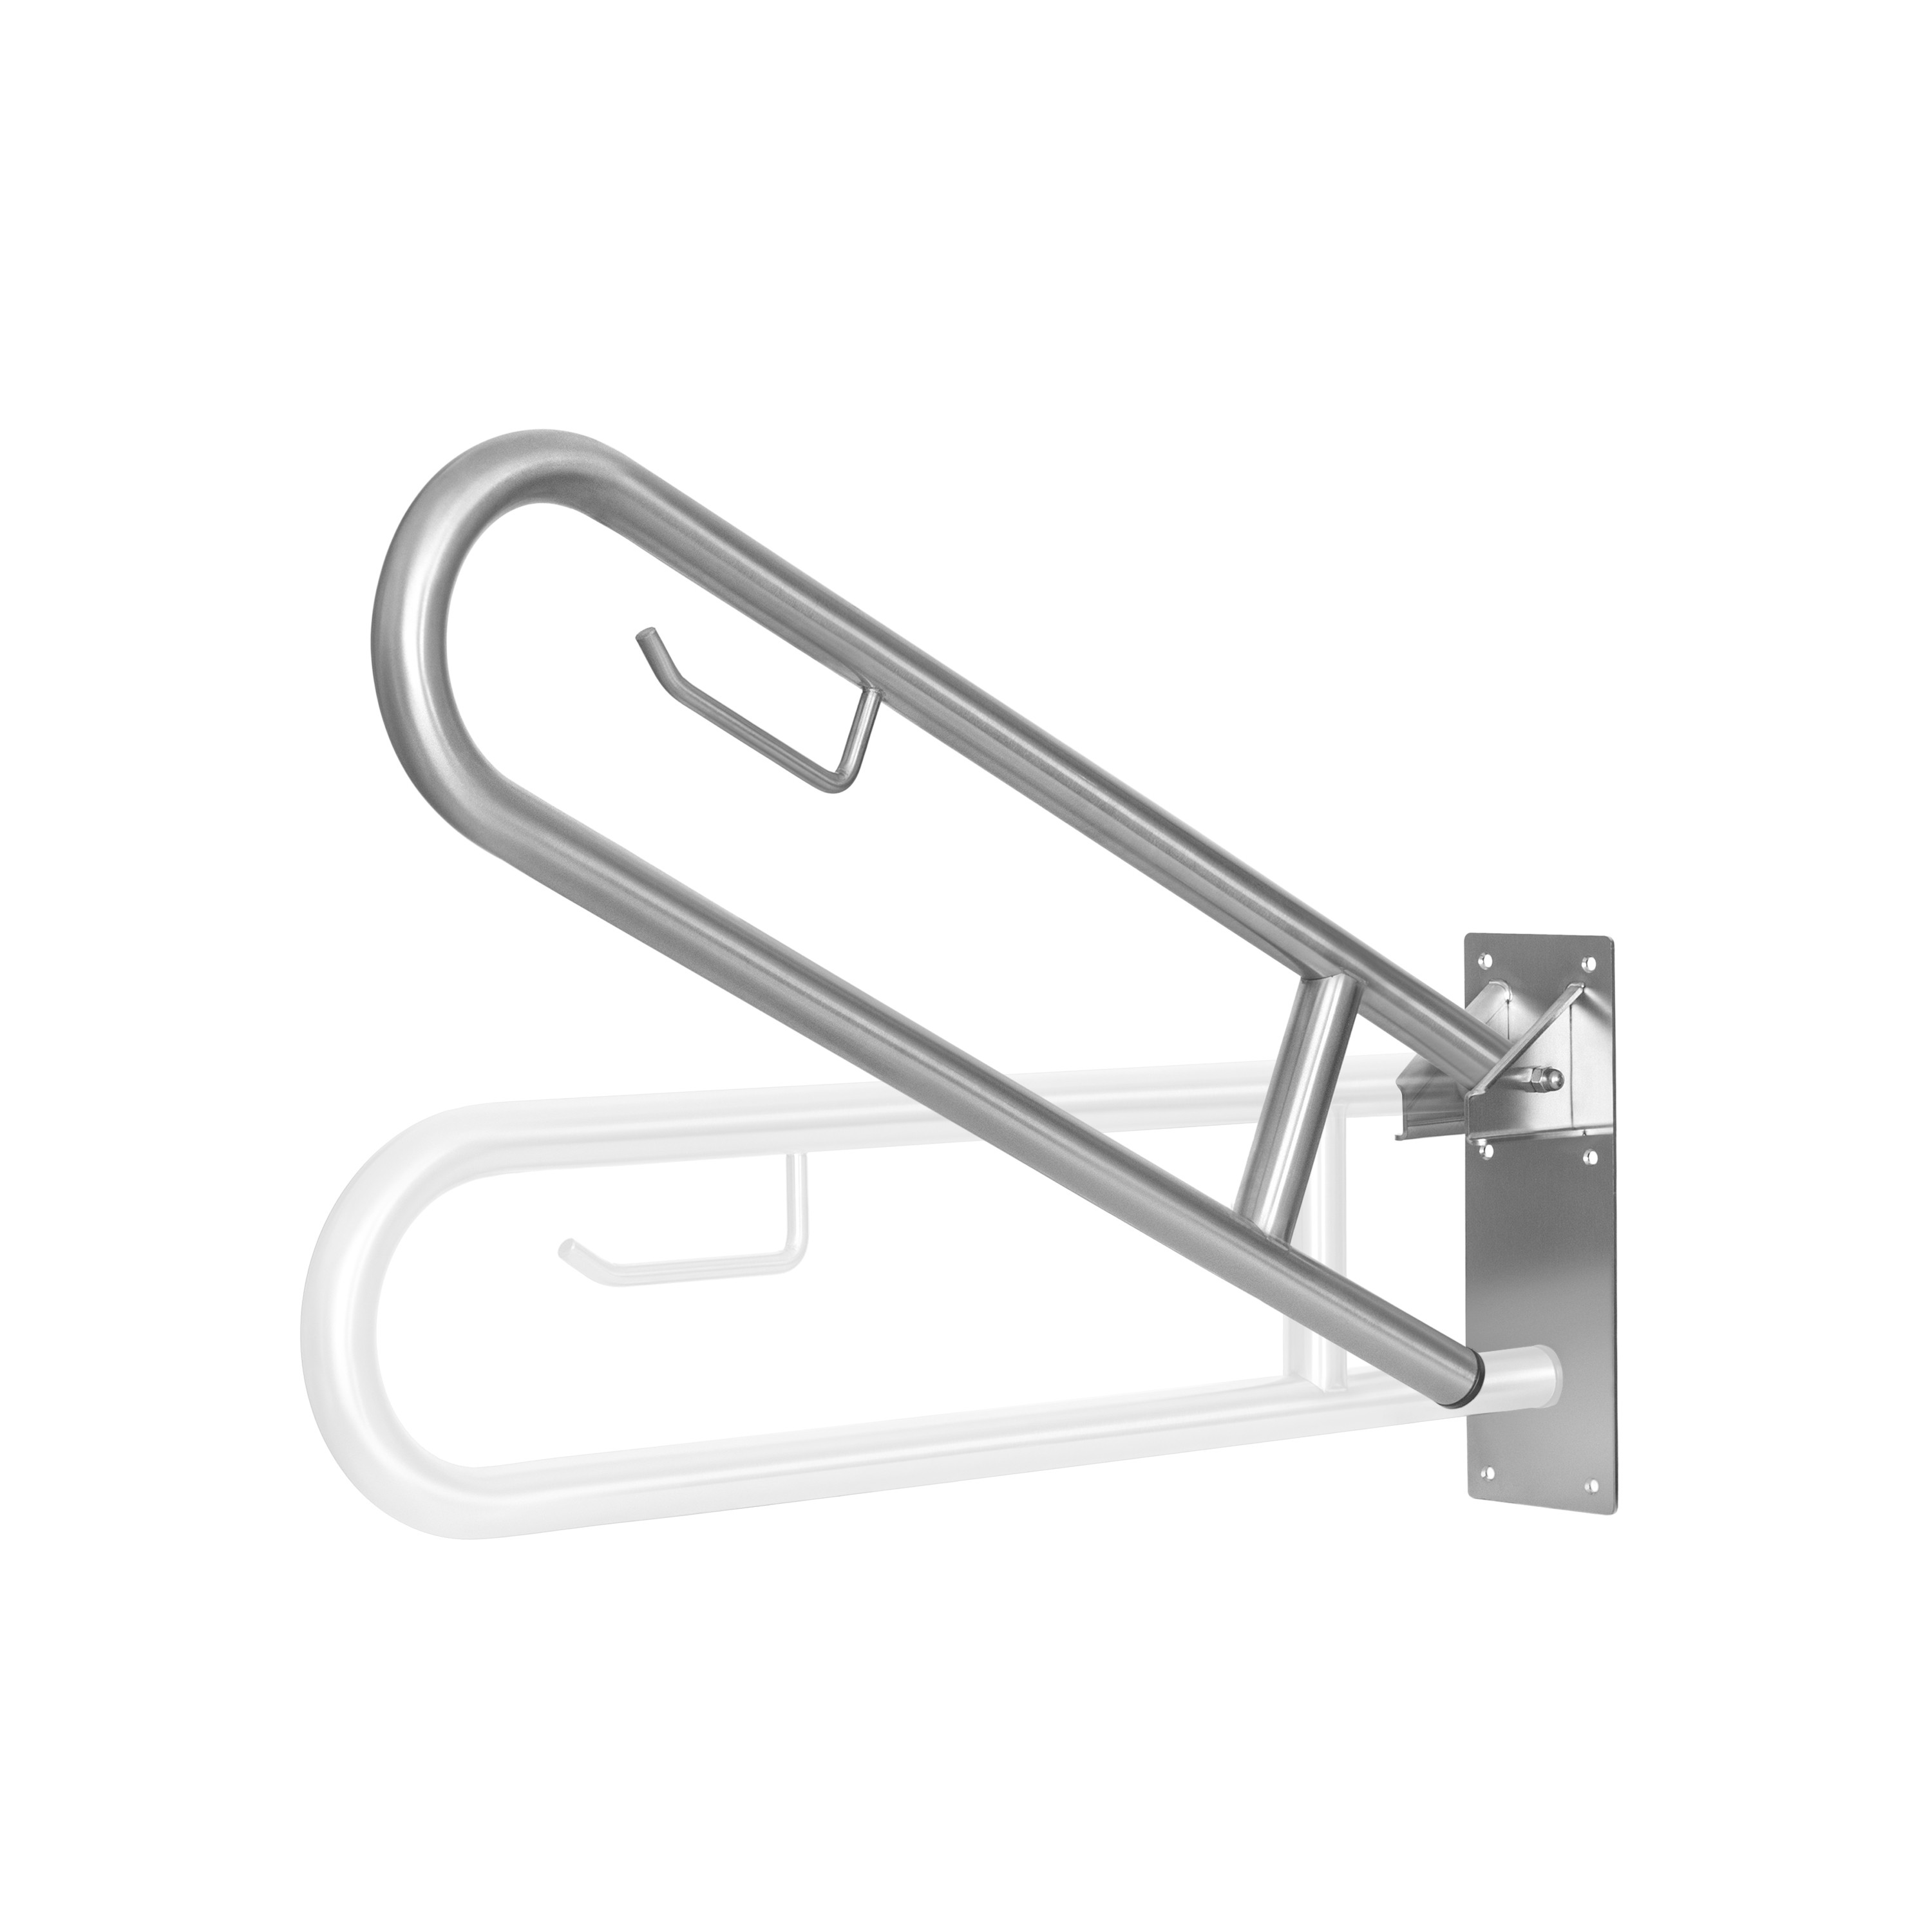 Grab bars, shower seats in stainless steel 